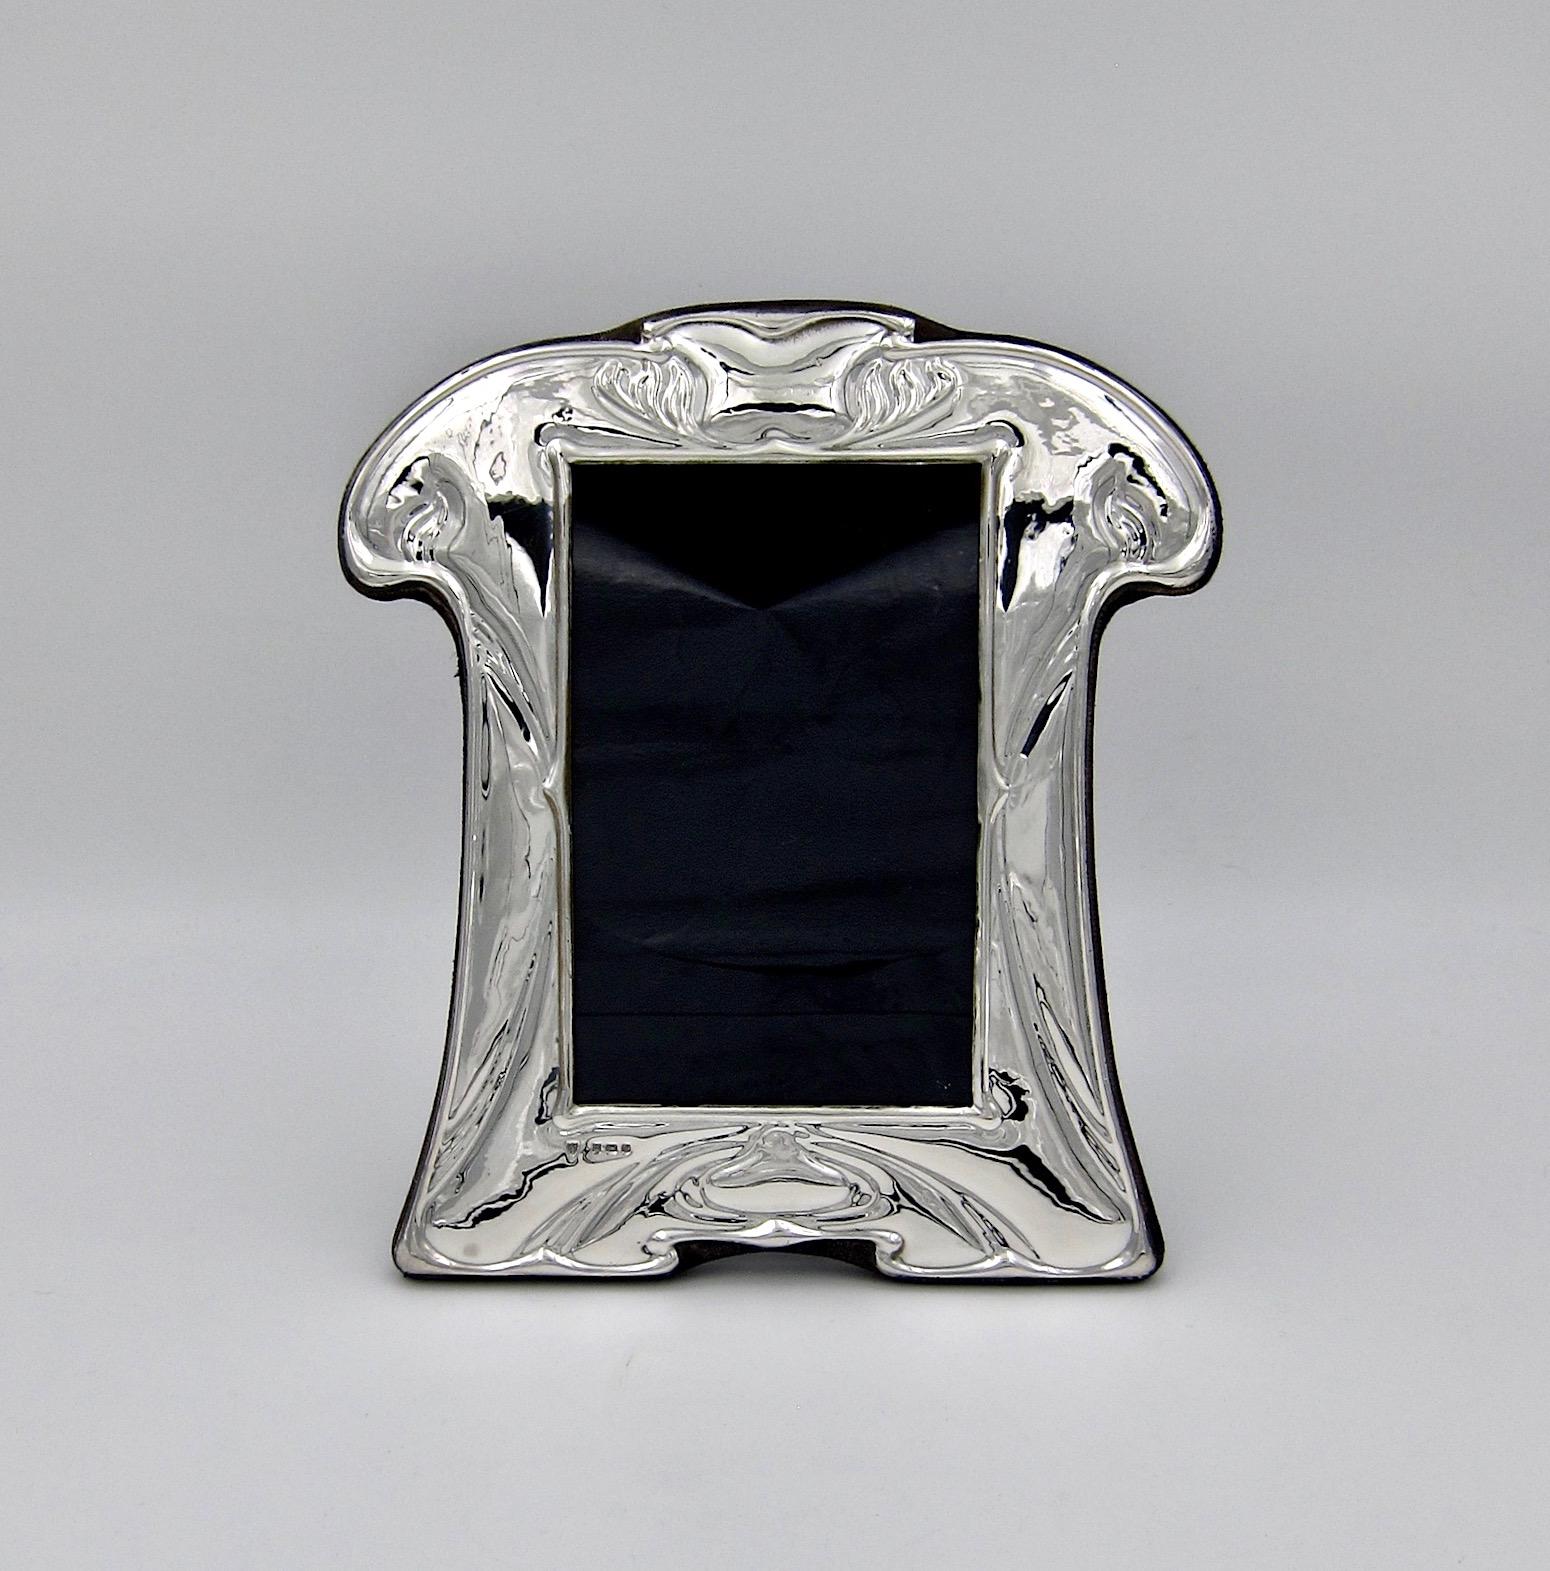 A vintage English picture frame in sterling silver, made in Birmingham and date marked for 1985. This elegant silver photograph frame was designed in the Art Nouveau style and would show beautifully on a mantlepiece, desk, or piano.

The frame